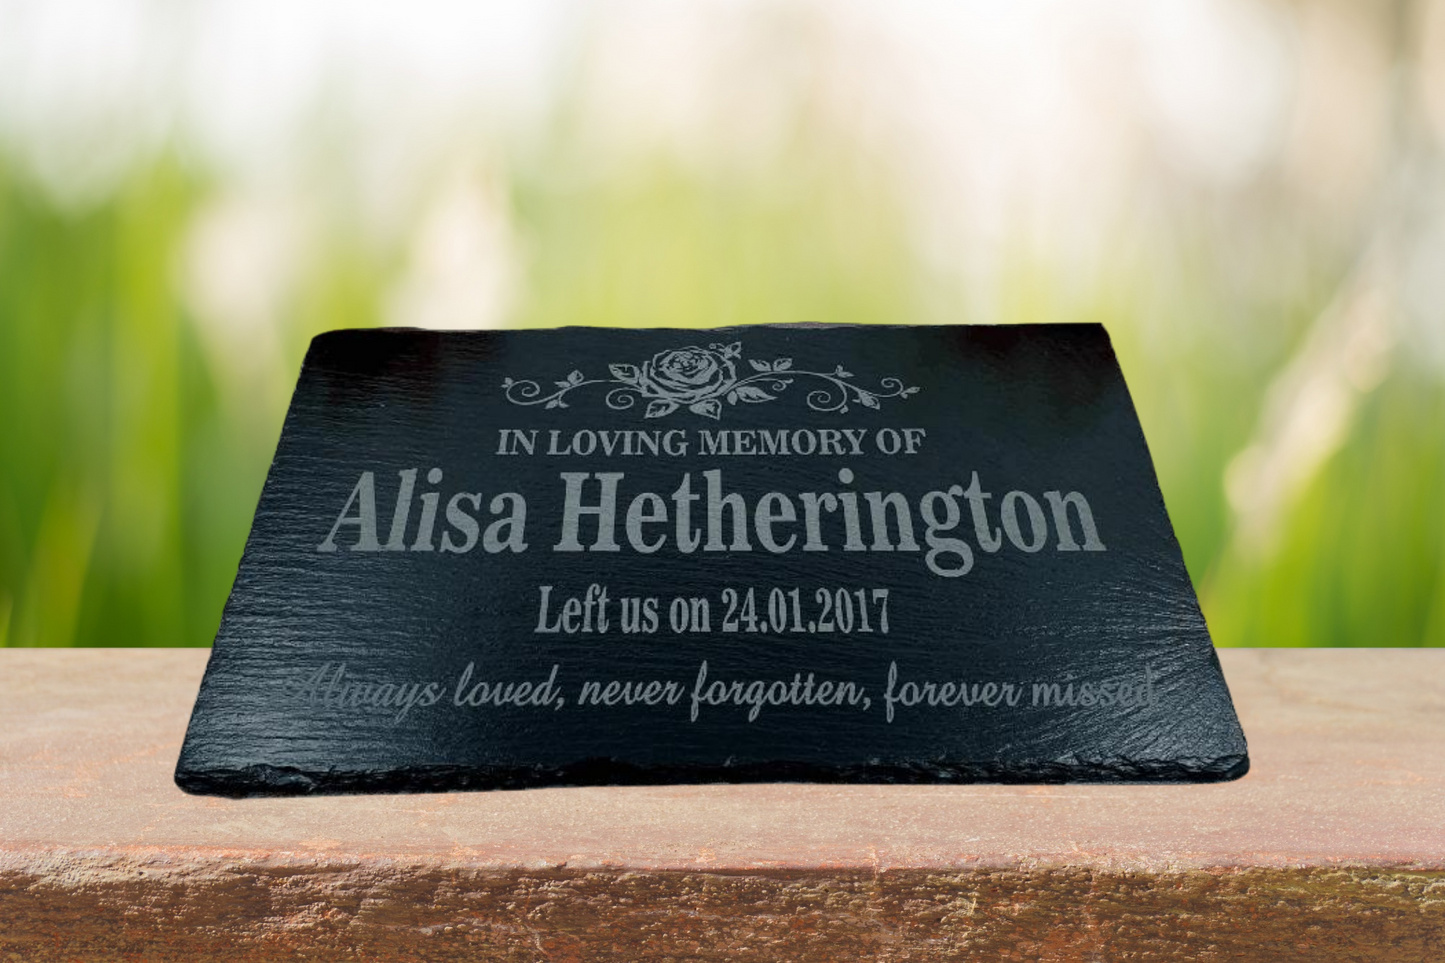 CUSTOM SLATE PLAQUE PERSONALIZED HANDCRAFTED, MEMORIAL FOR A LOVED ONE, WEDDING GIFT, BRIDAL, OUTDOOR PLAQUE, ENGRAVED, LASER ETCHED, CHEESE PLATTER HOUSEWARMING GIFT